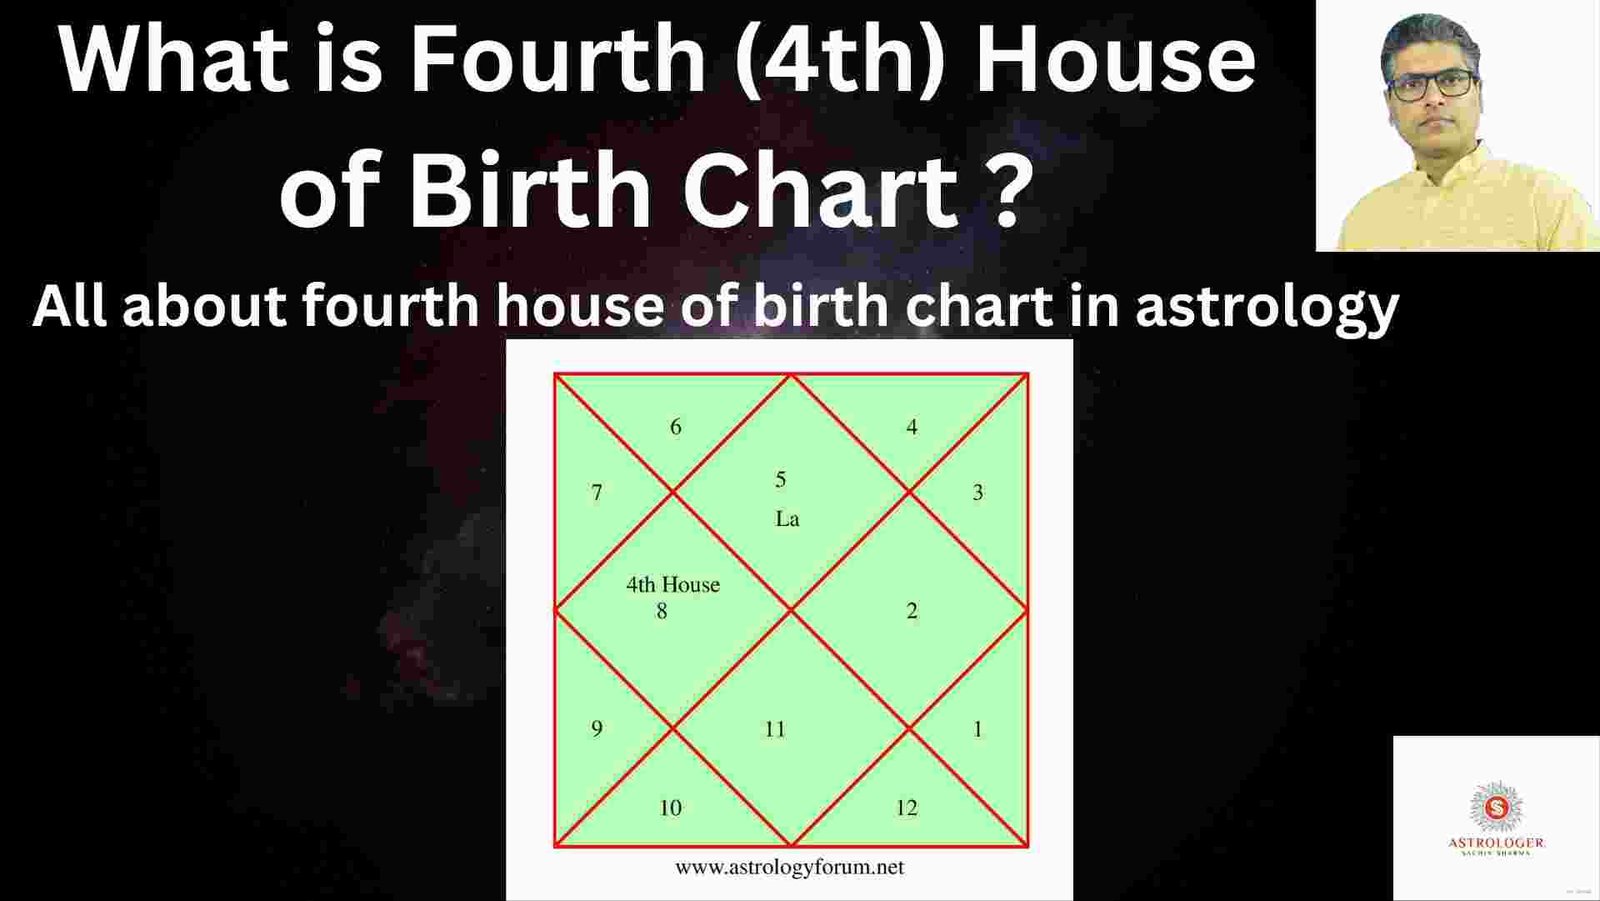 4th house astrology